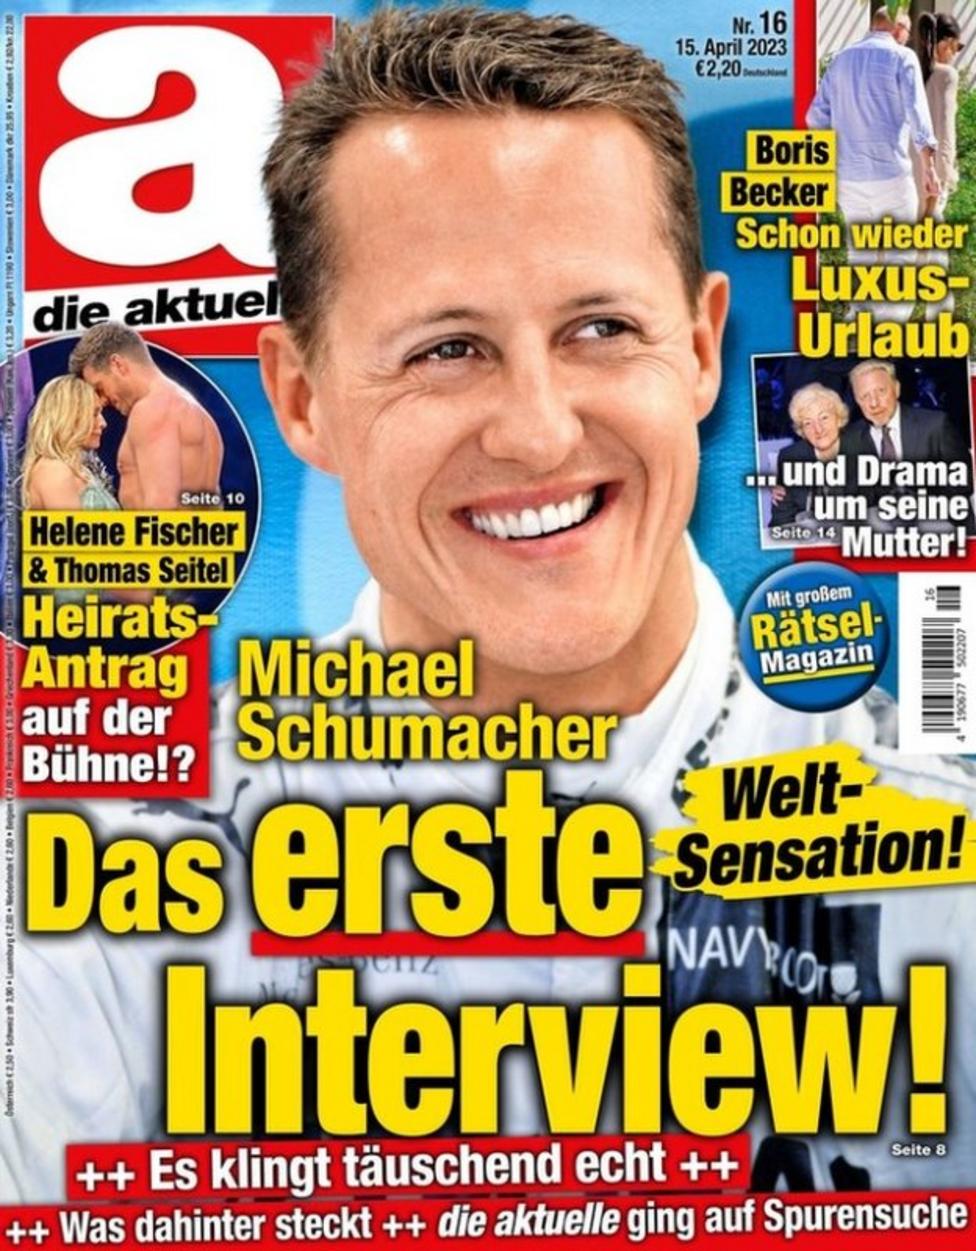 The April 15 front cover of weekly German magazine Die Aktuelle